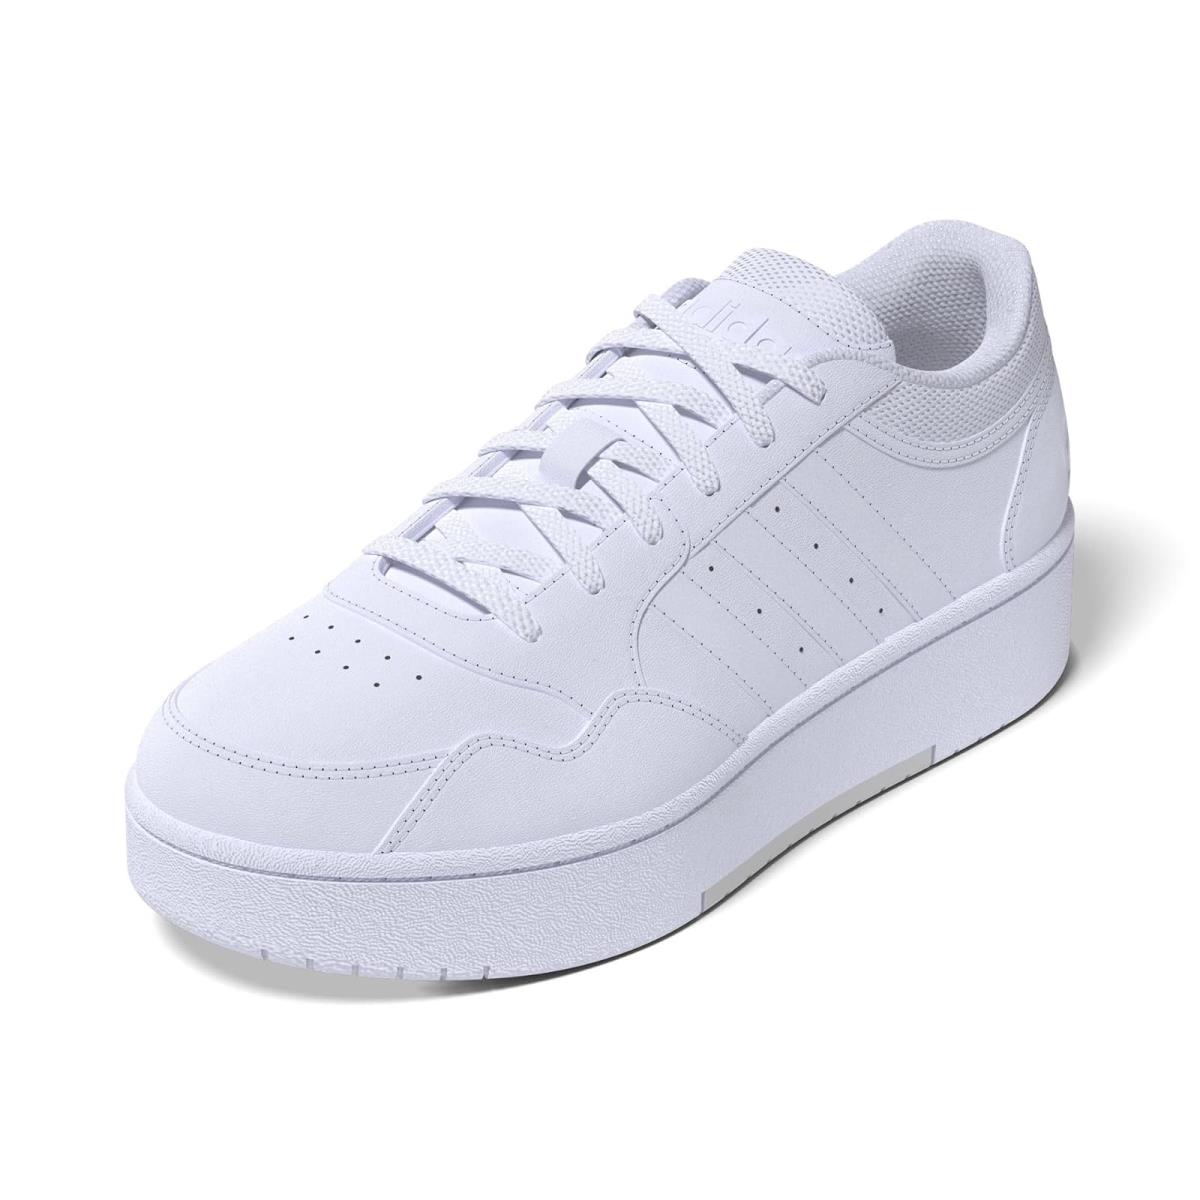 Woman`s Sneakers Athletic Shoes Adidas Hoops 3.0 Bold White/White/Dash Grey